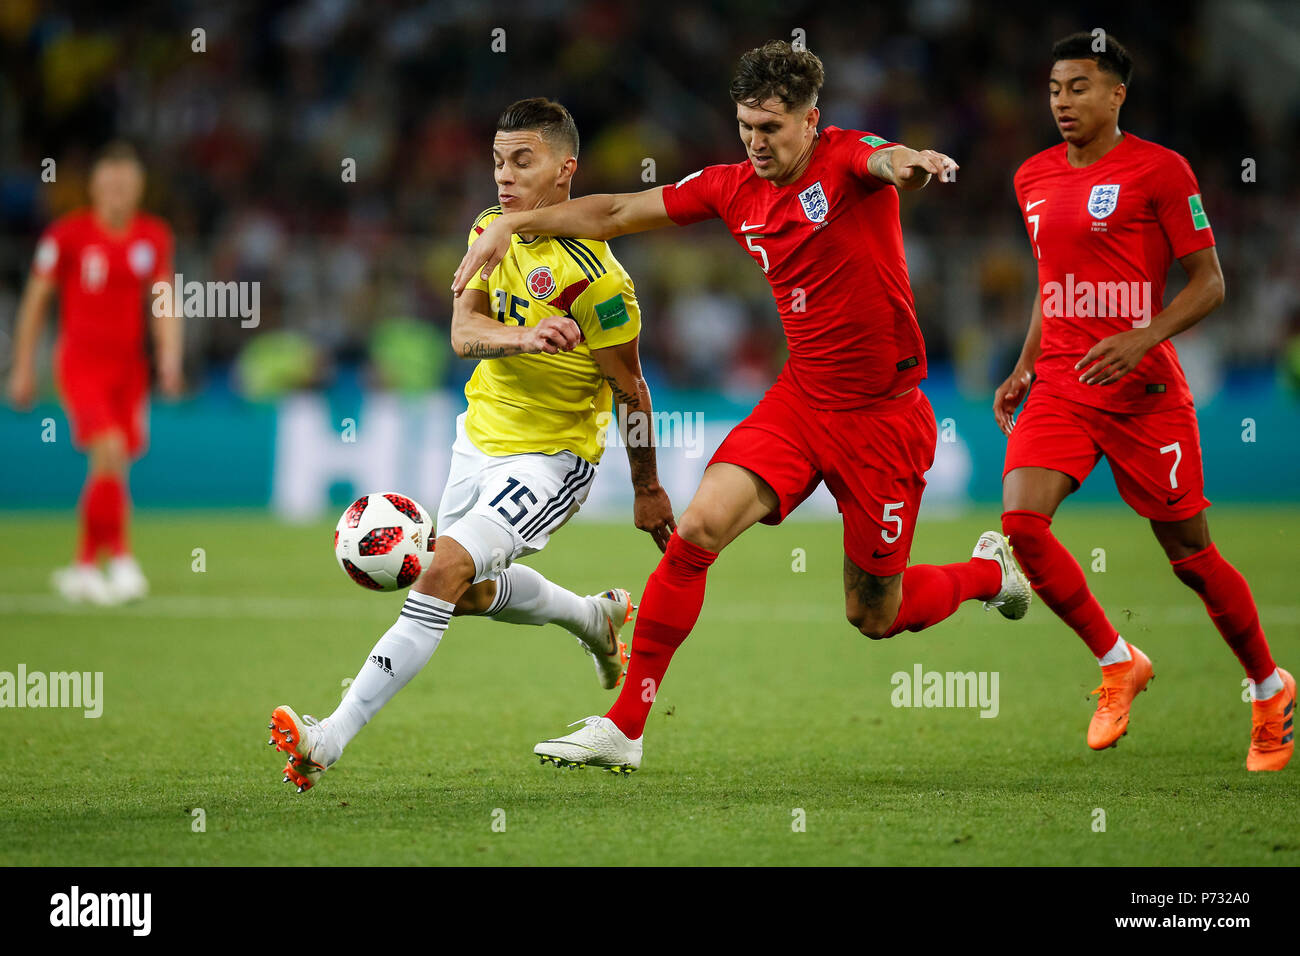 Moscow, Russia. 3rd July, 2018. Mateus Uribe of Colombia and John Stones of England during the 2018 FIFA World Cup Round of 16 match between Colombia and England at Spartak Stadium on July 3rd 2018 in Moscow, Russia.Credit: PHC Images/Alamy Live News Stock Photo